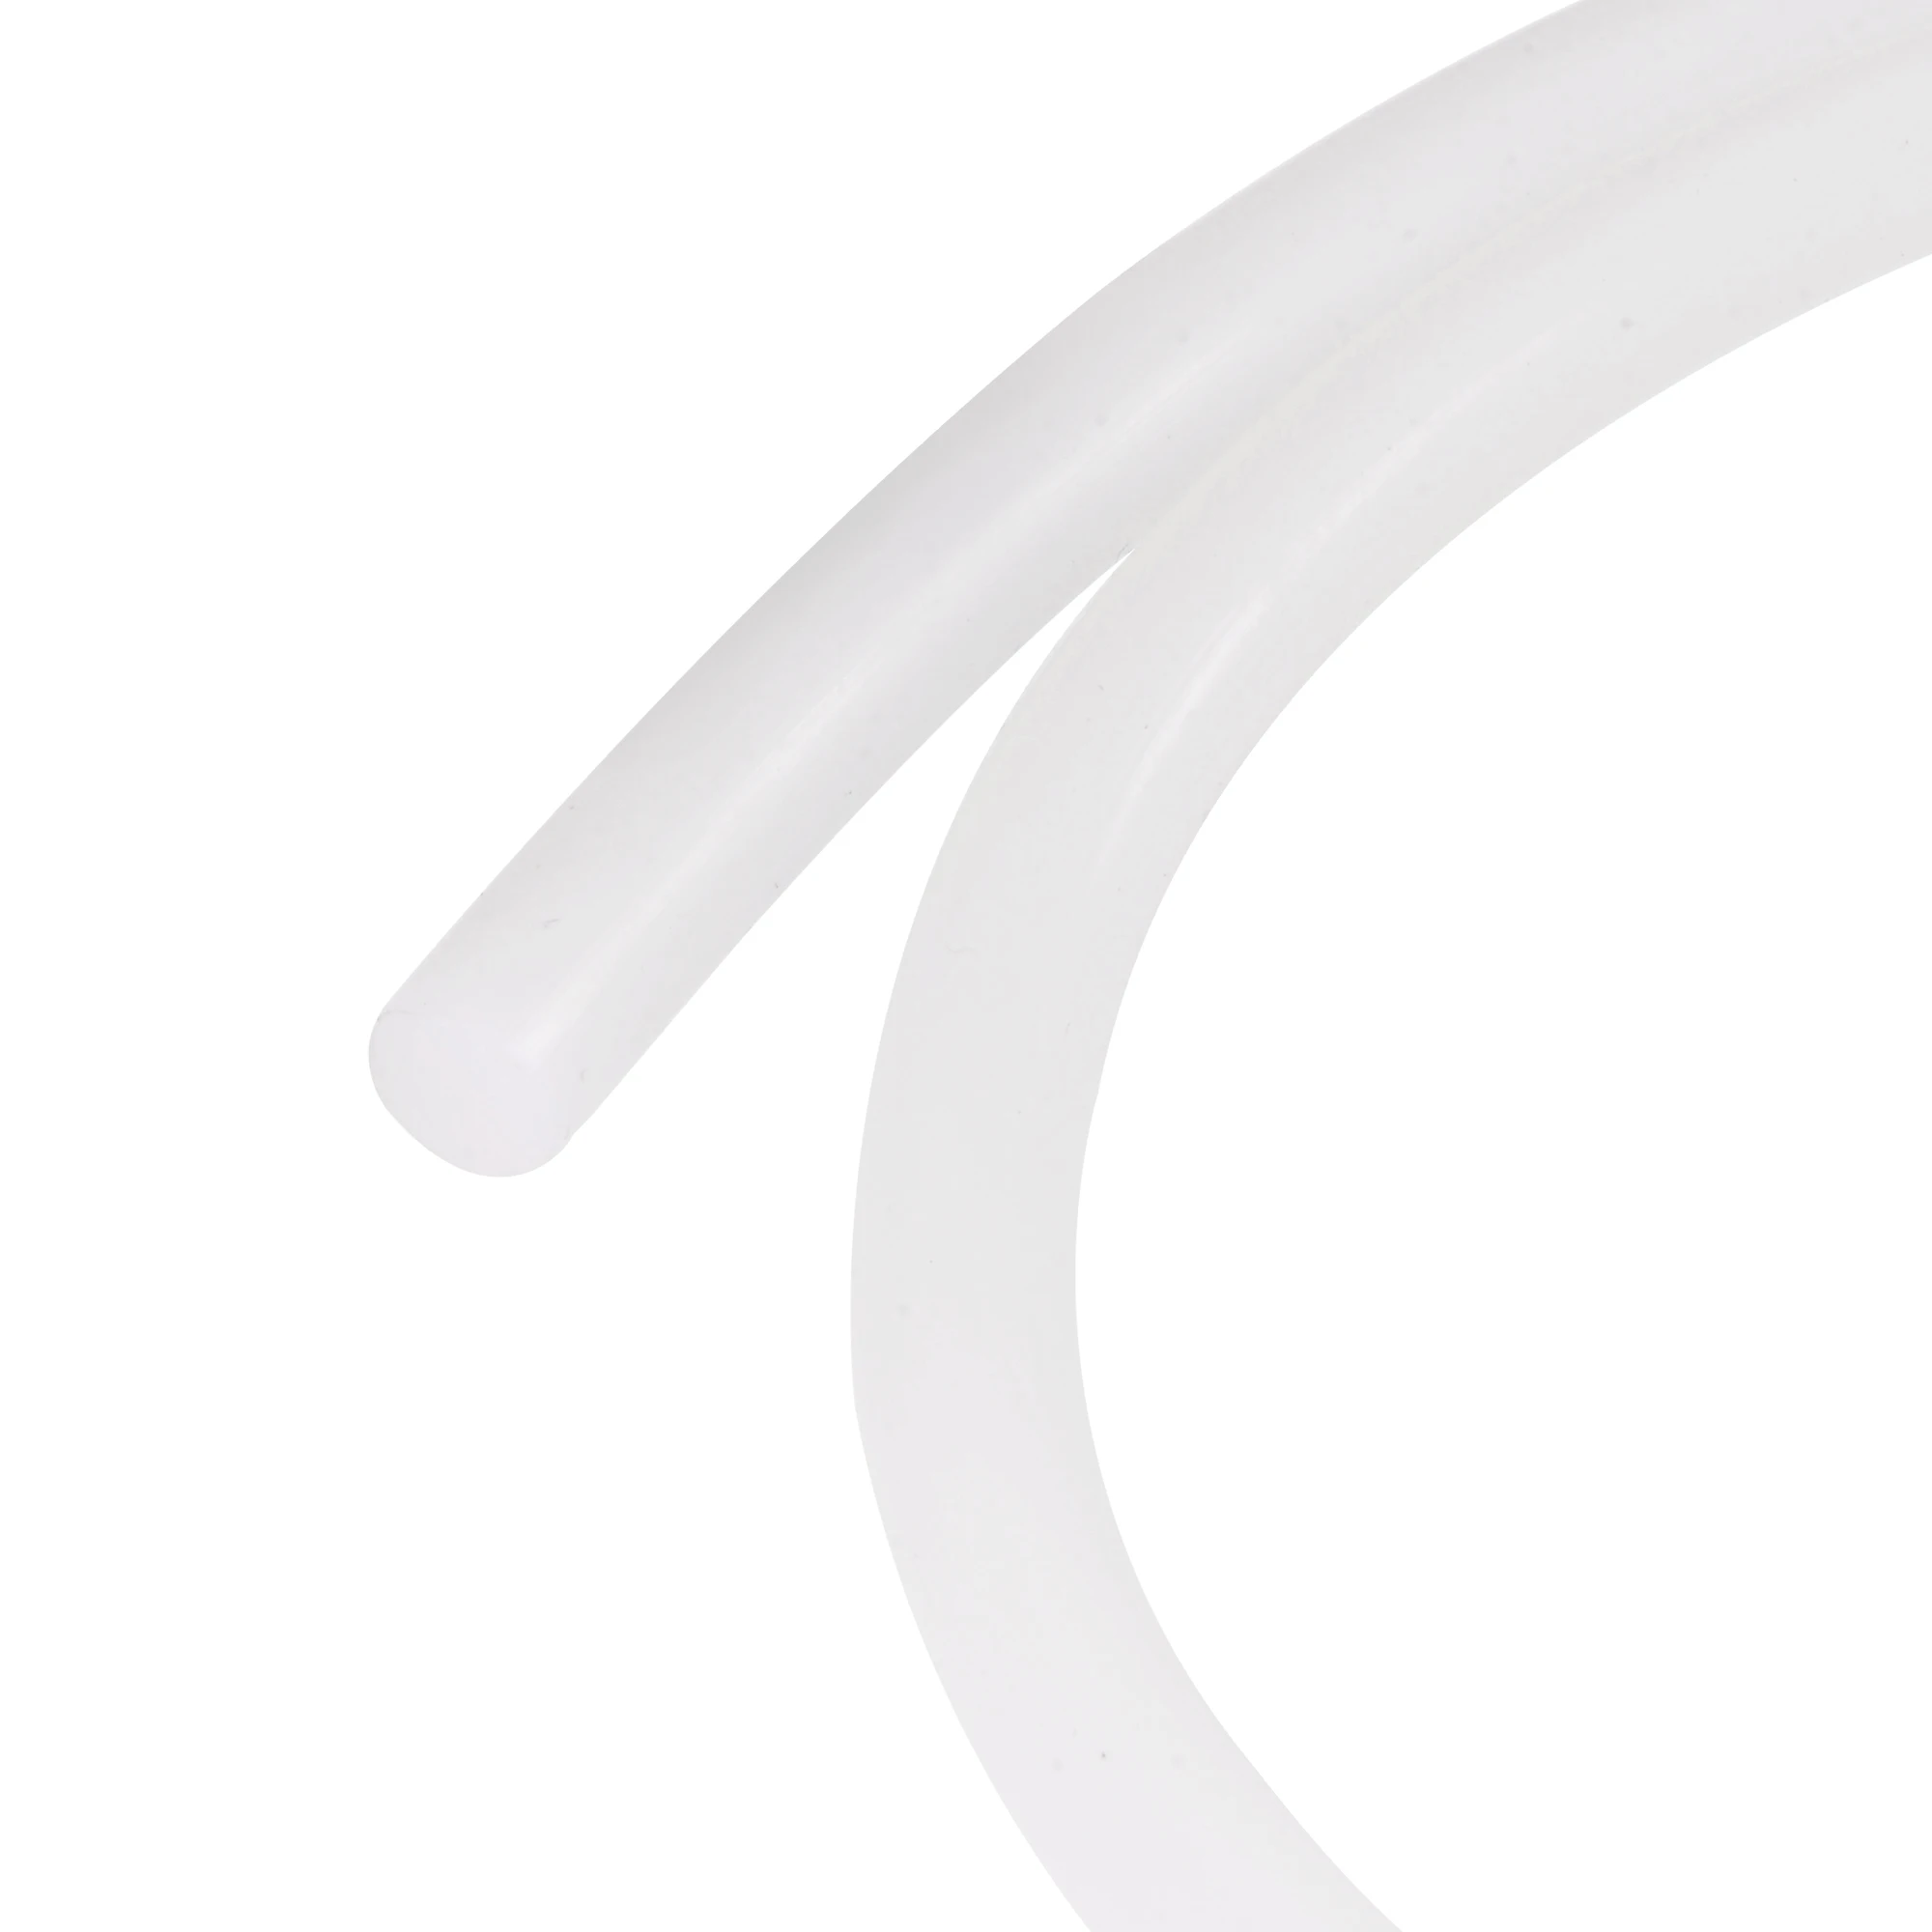 Uxcell Silicone Bending Insert Hard Tube 3/8 5ft White Soft for Rigid PETG Tubing Water Cooling bykski b htj db90 v2 pc water cooling 90 degree fitting tube connector sliding tubing for od14mm hard tube g1 4 4seal rings